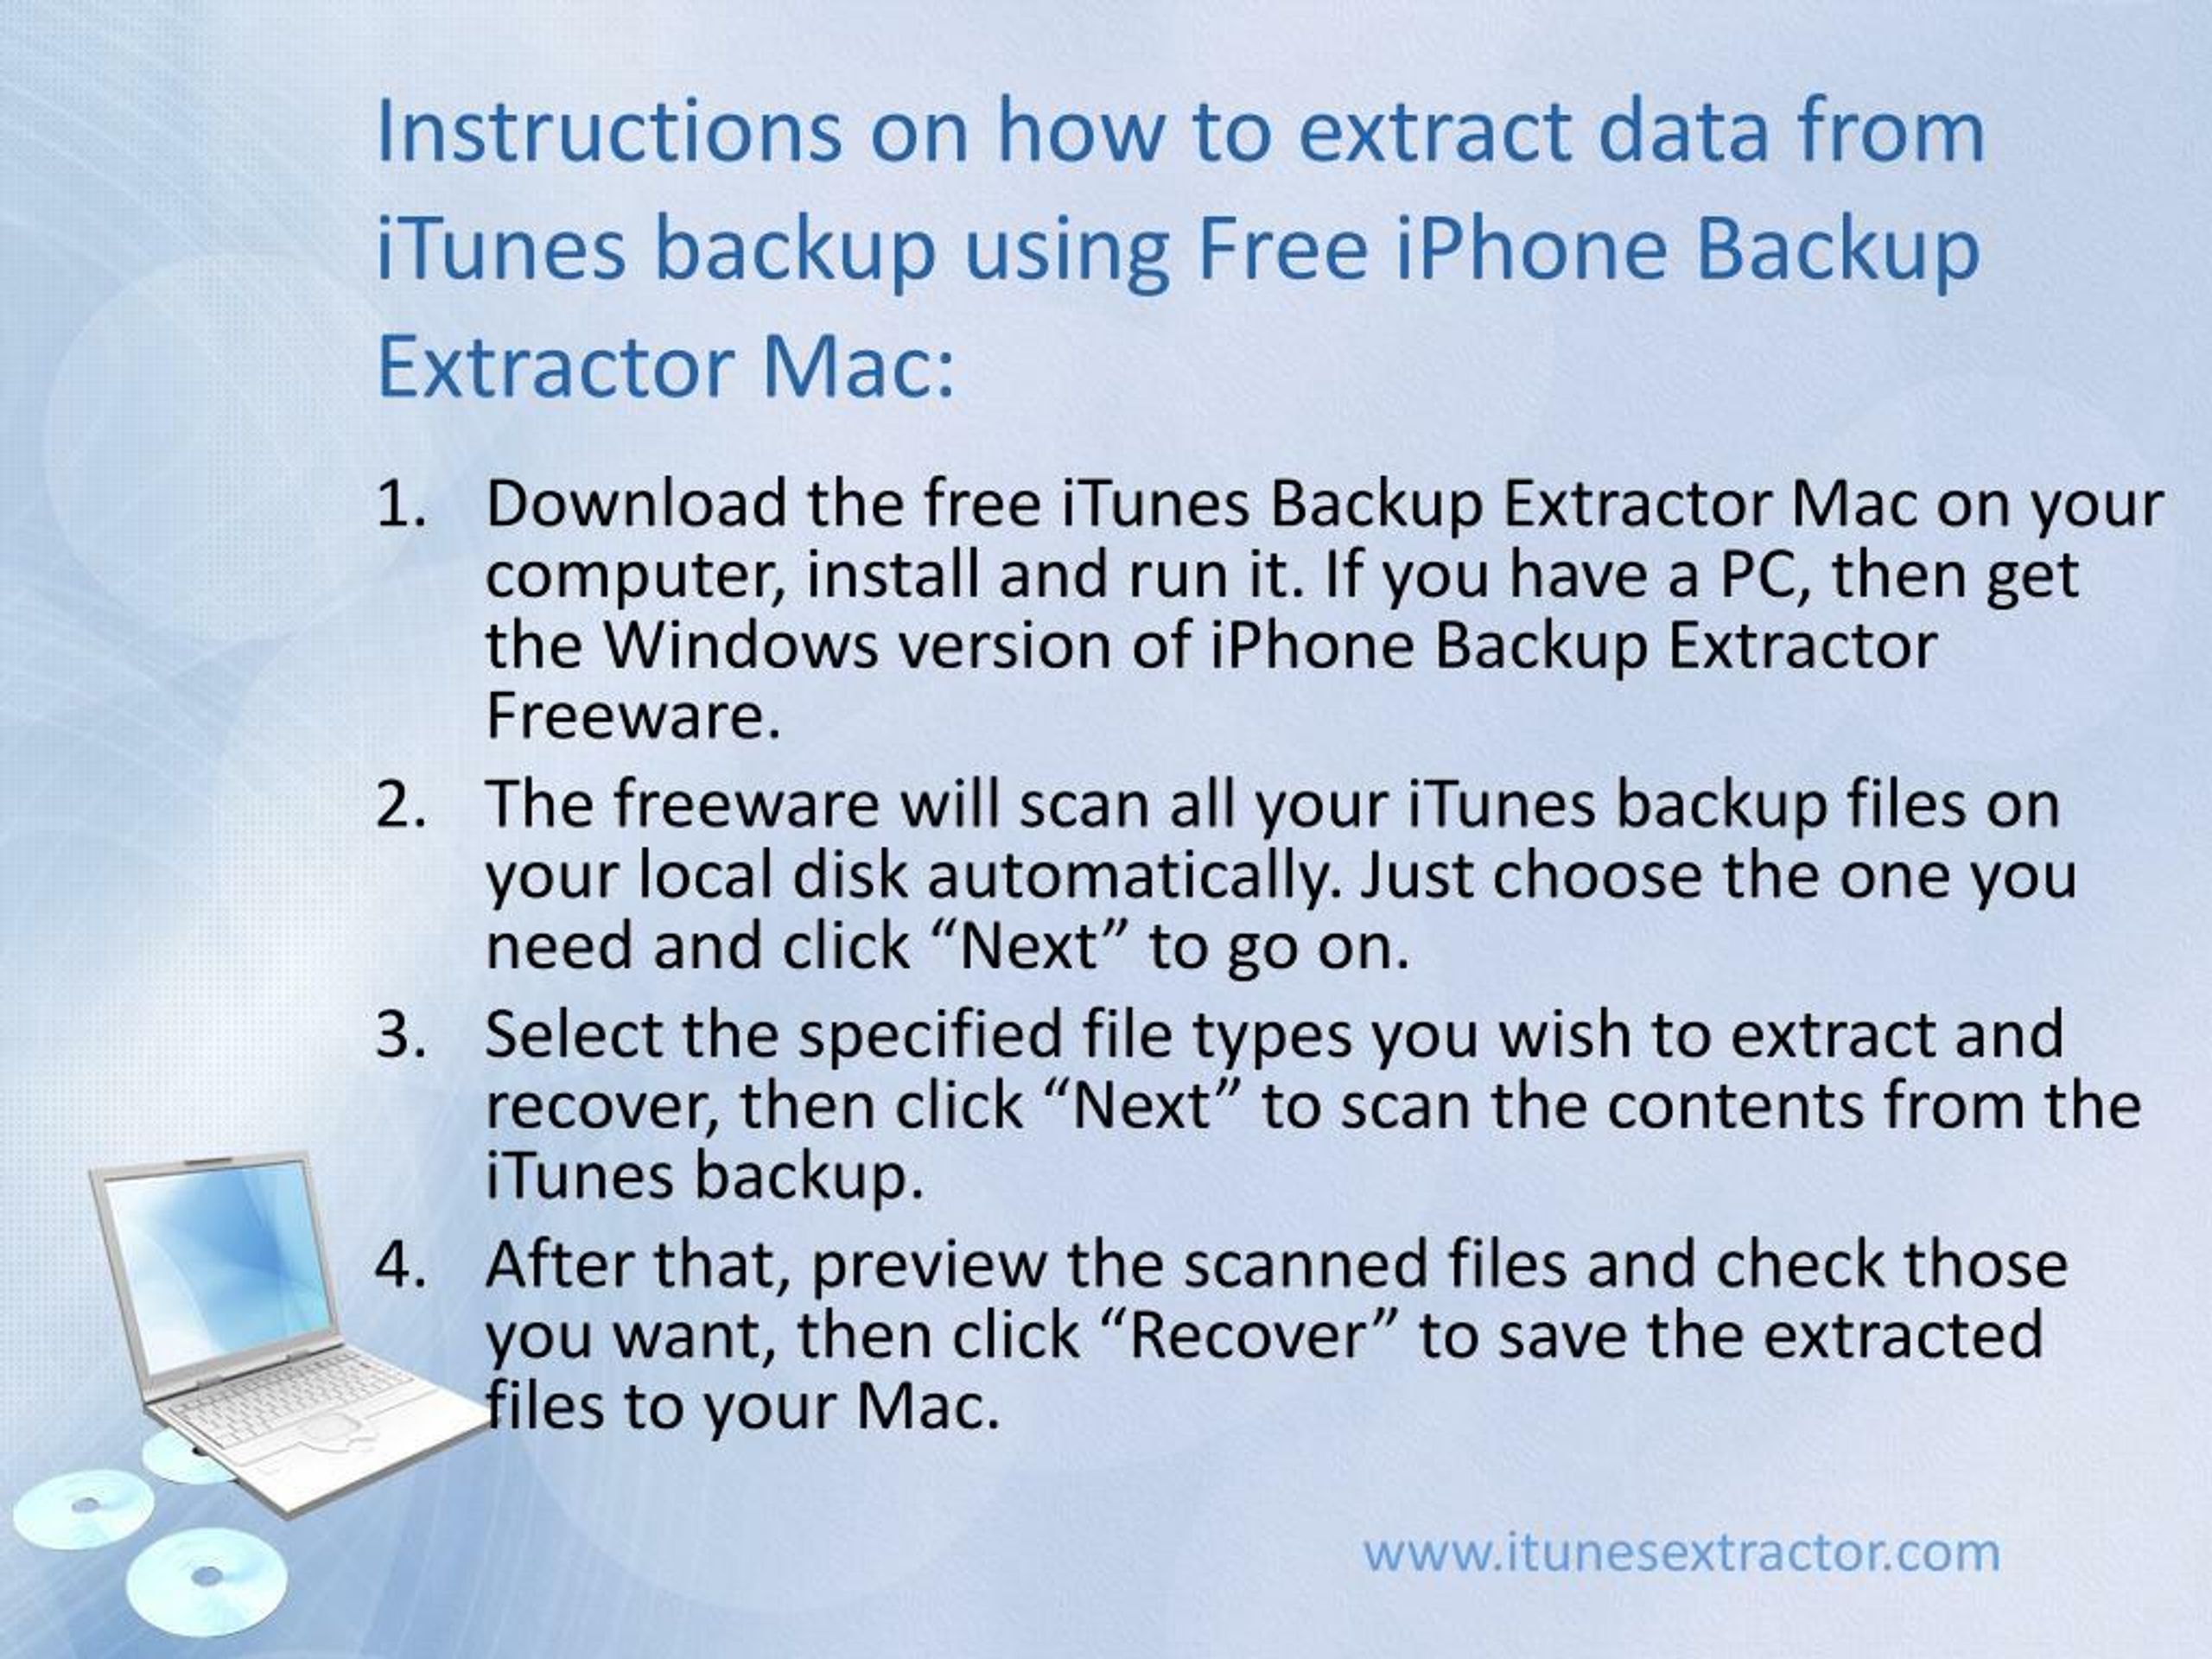 iphone backup extractor for mac free